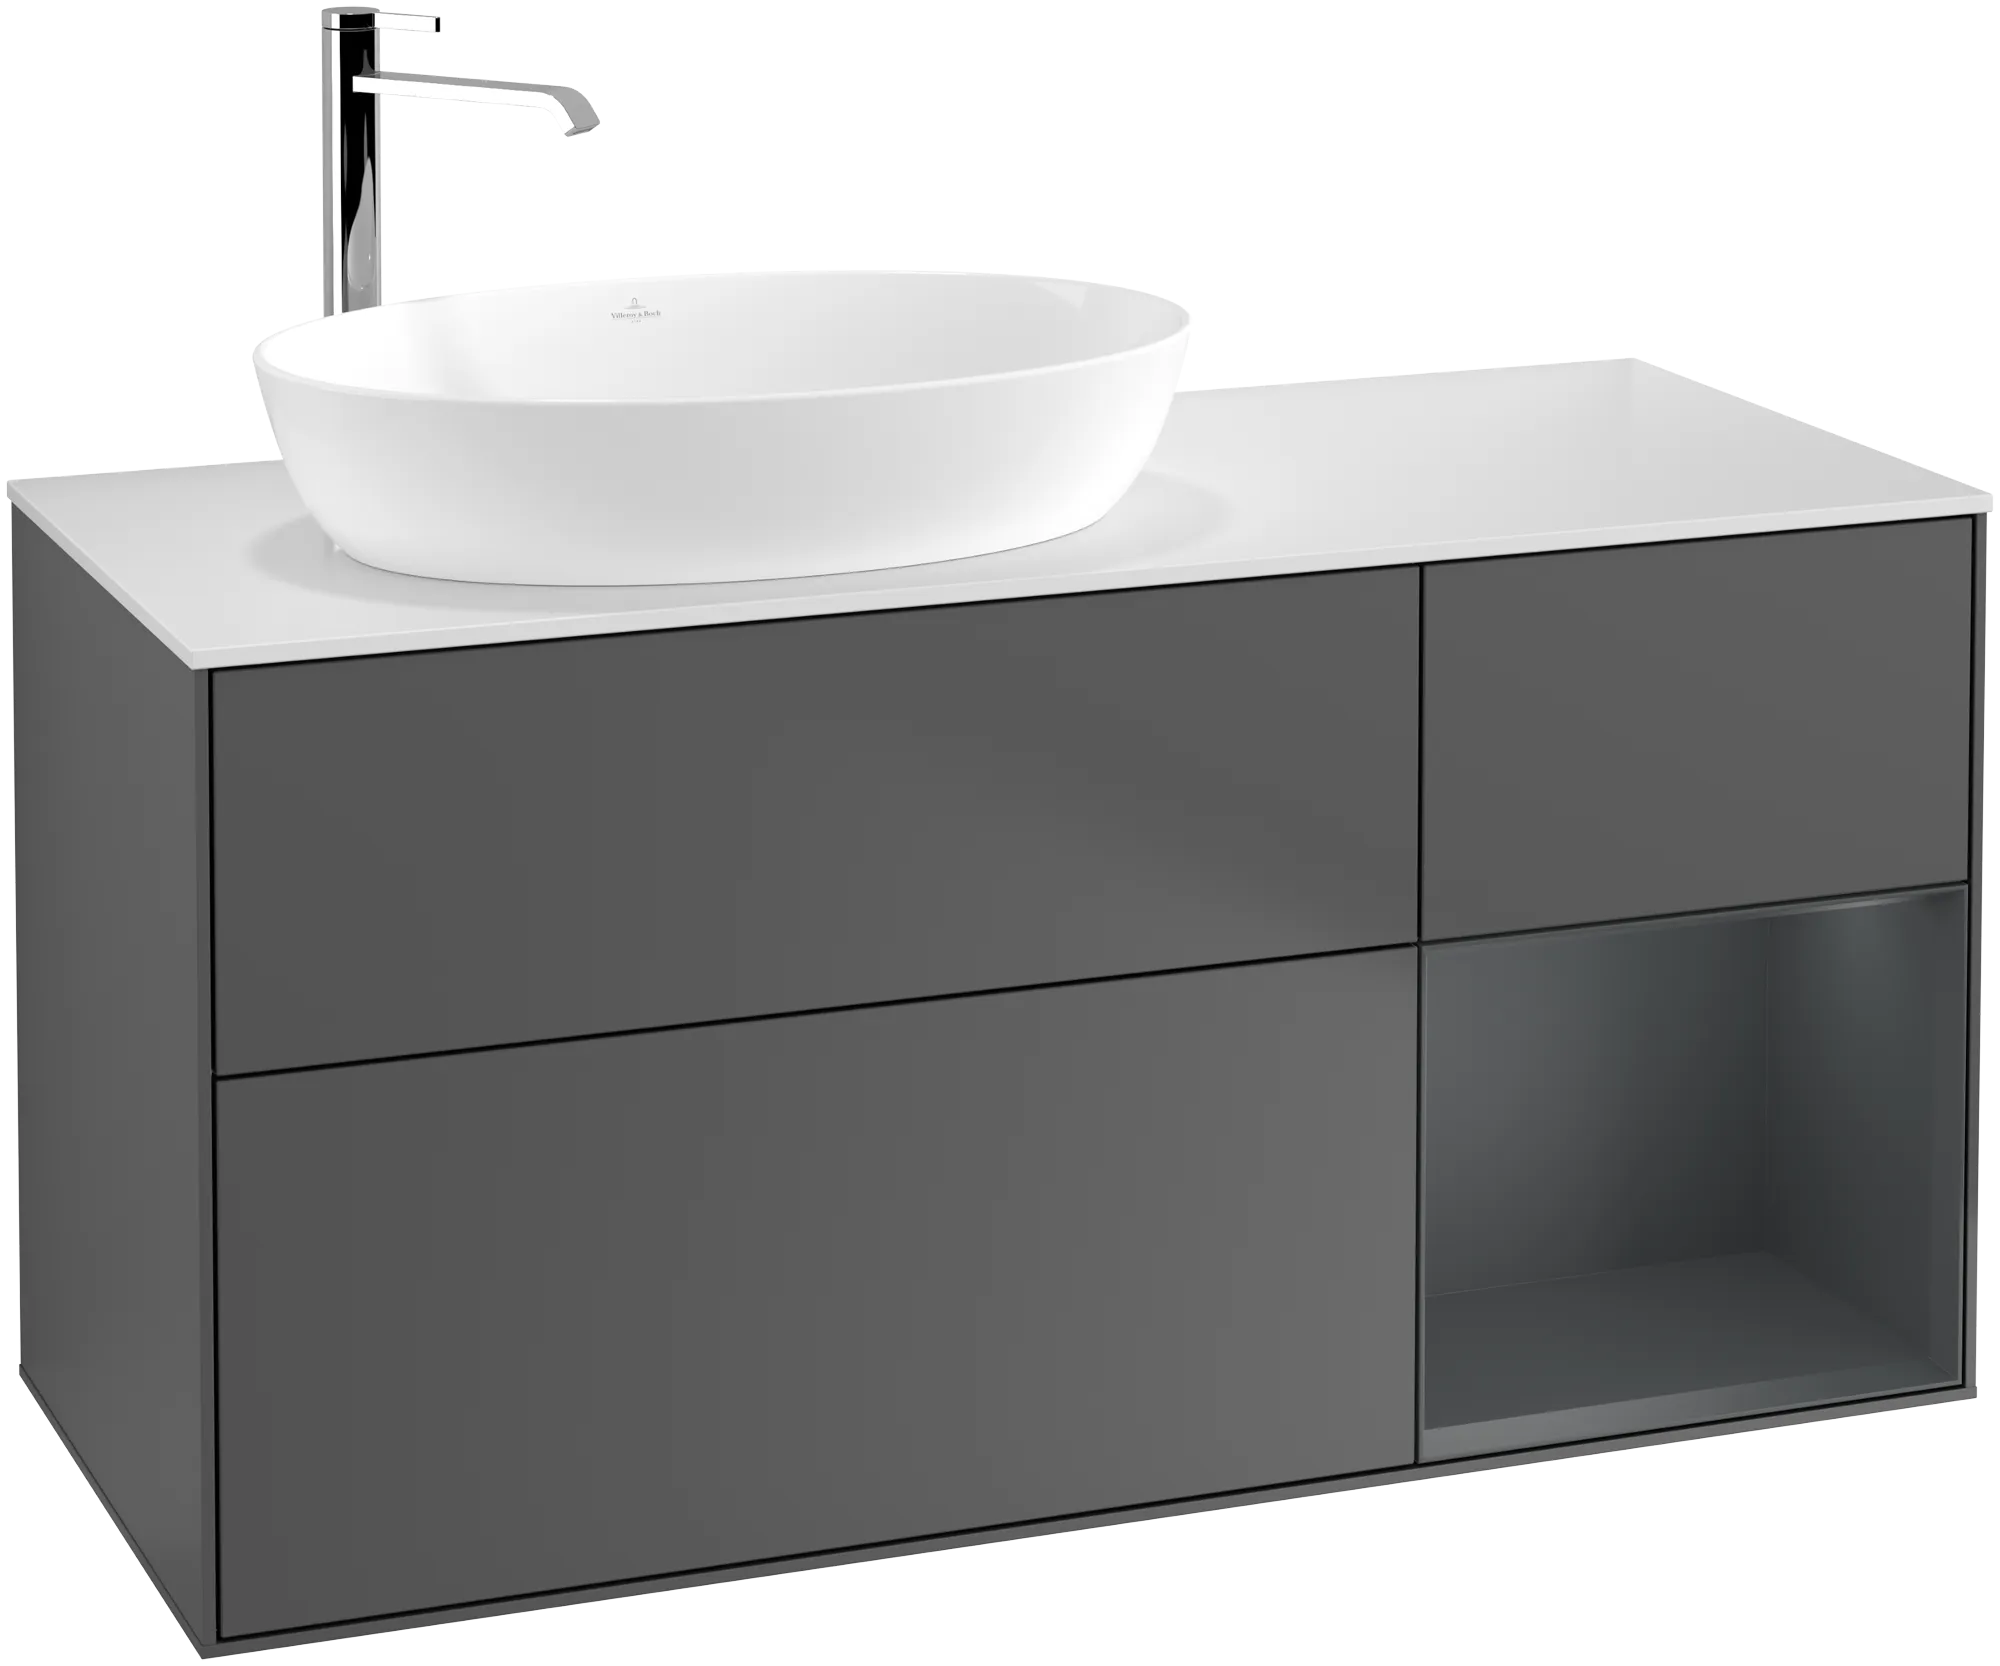 VILLEROY BOCH Finion Vanity unit, with lighting, 3 pull-out compartments, 1200 x 603 x 501 mm, Anthracite Matt Lacquer / Midnight Blue Matt Lacquer / Glass White Matt #G931HGGK resmi